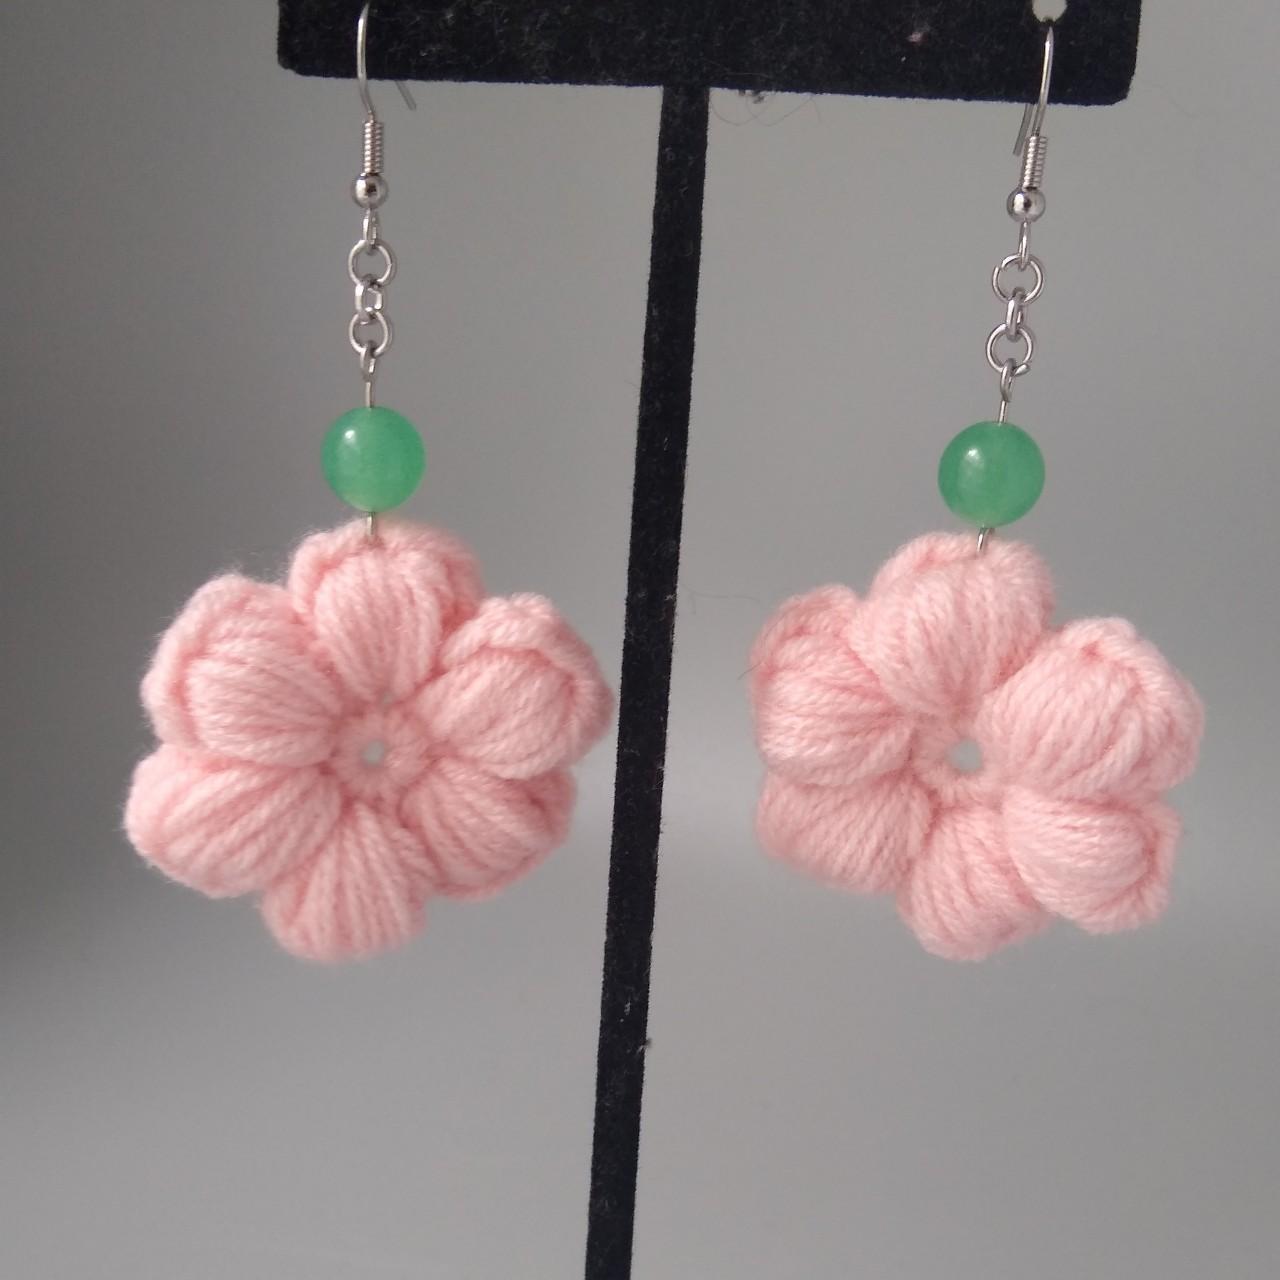 Women's Pink and Green Jewellery